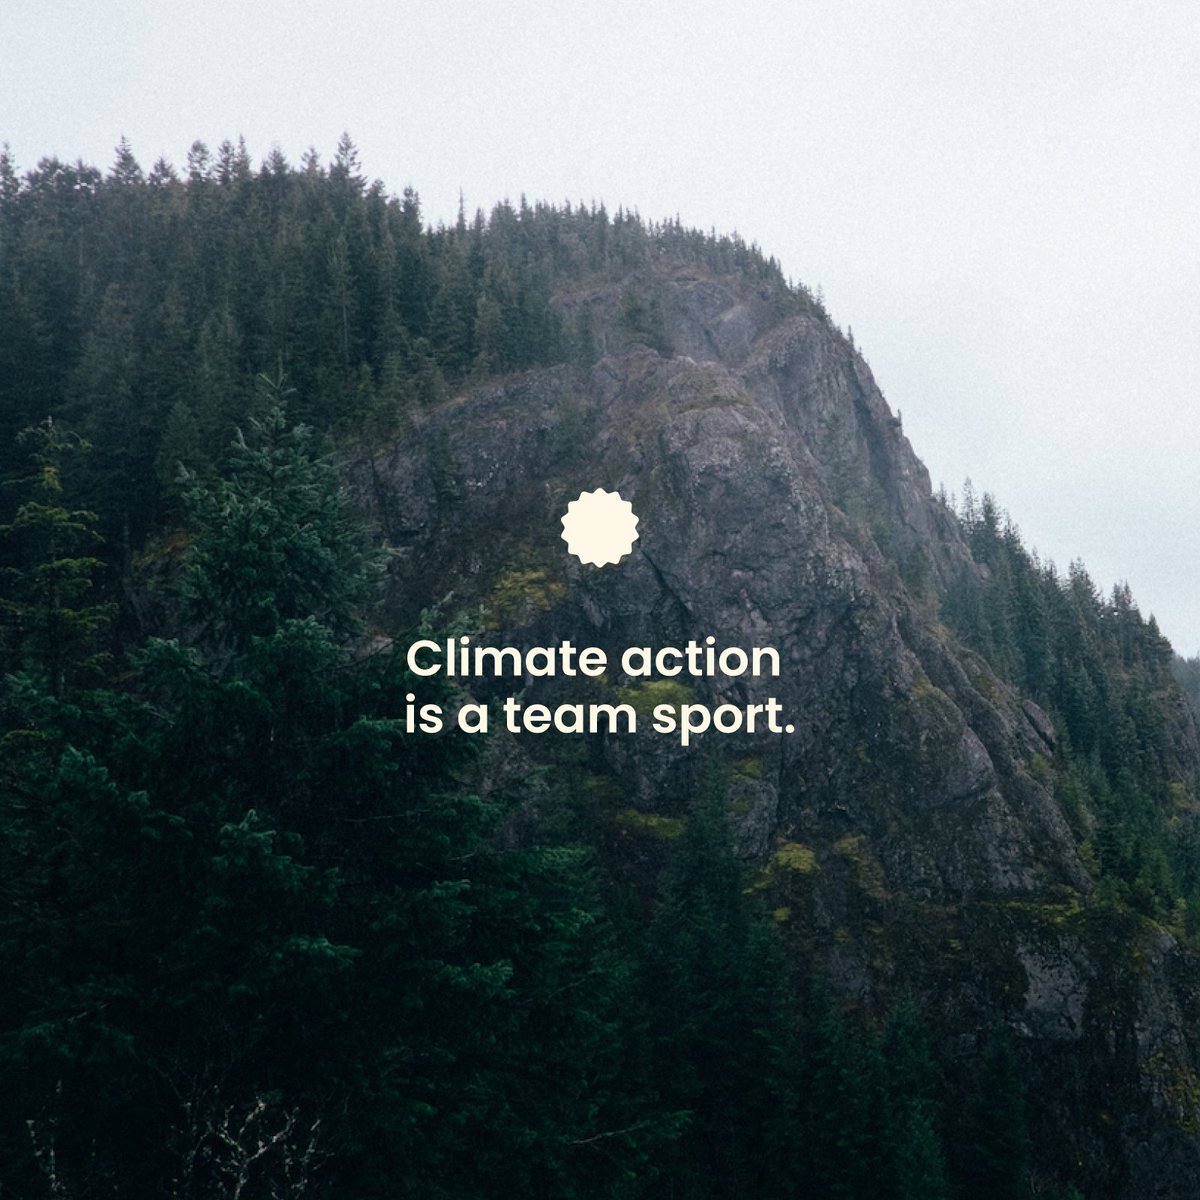 Elevate your impact—climate action is the squad you want to be on! 🌿 Can we count YOU in? #countusin #takeastep #climatechampions #sustainability #sustainablelifestyle #climateaction #climatechange